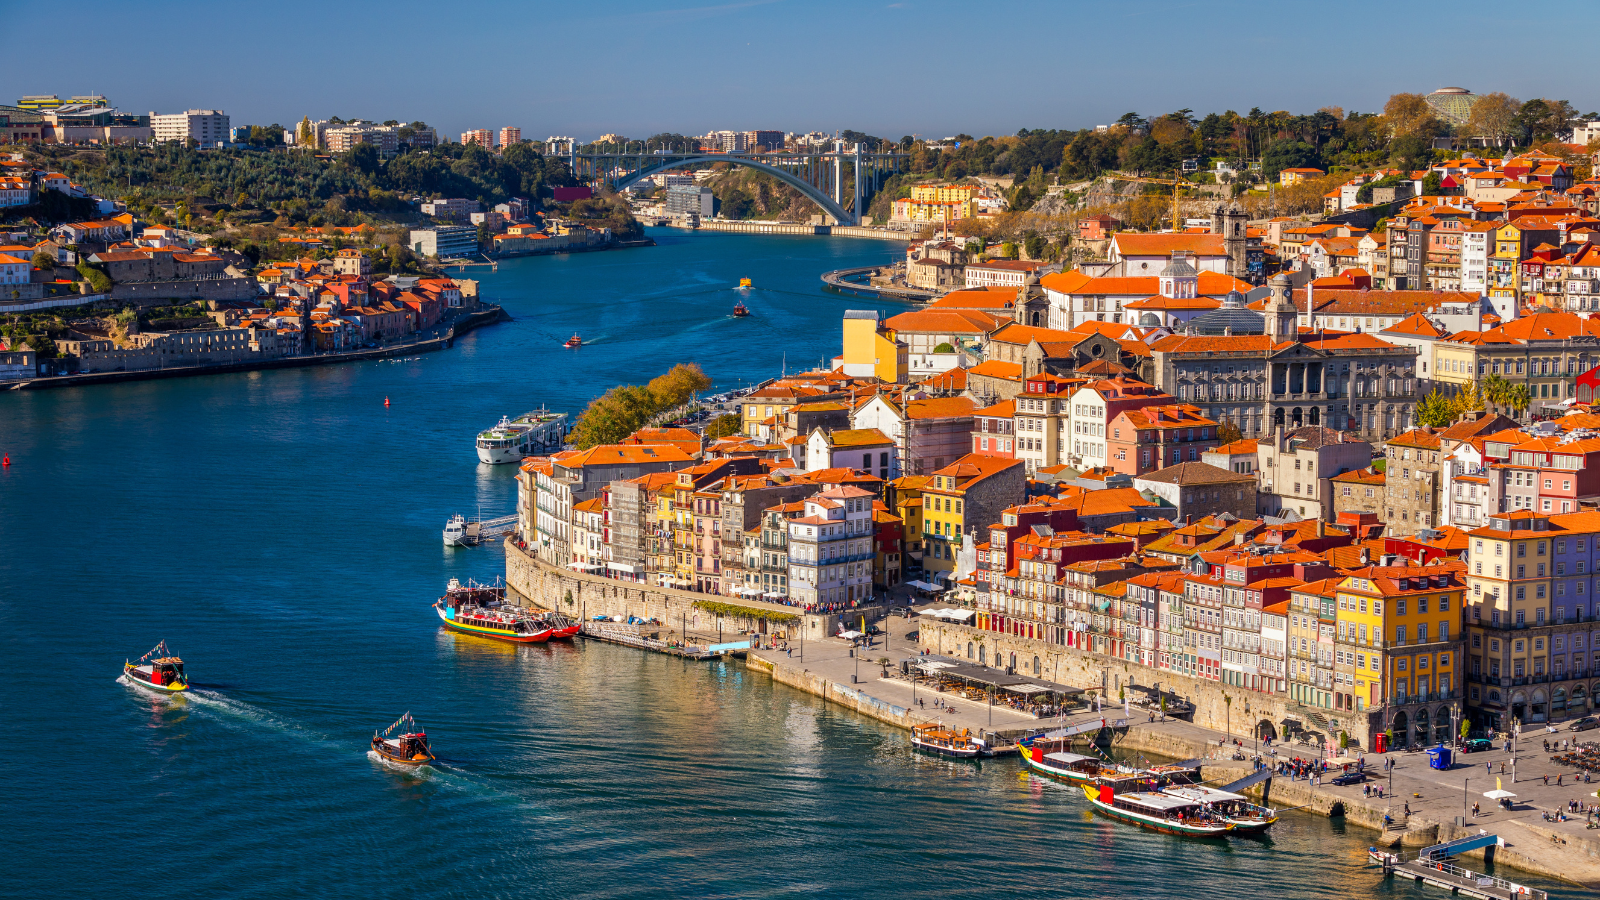 Portugal - the stop on the journey to make 10 best things to do in Portugal